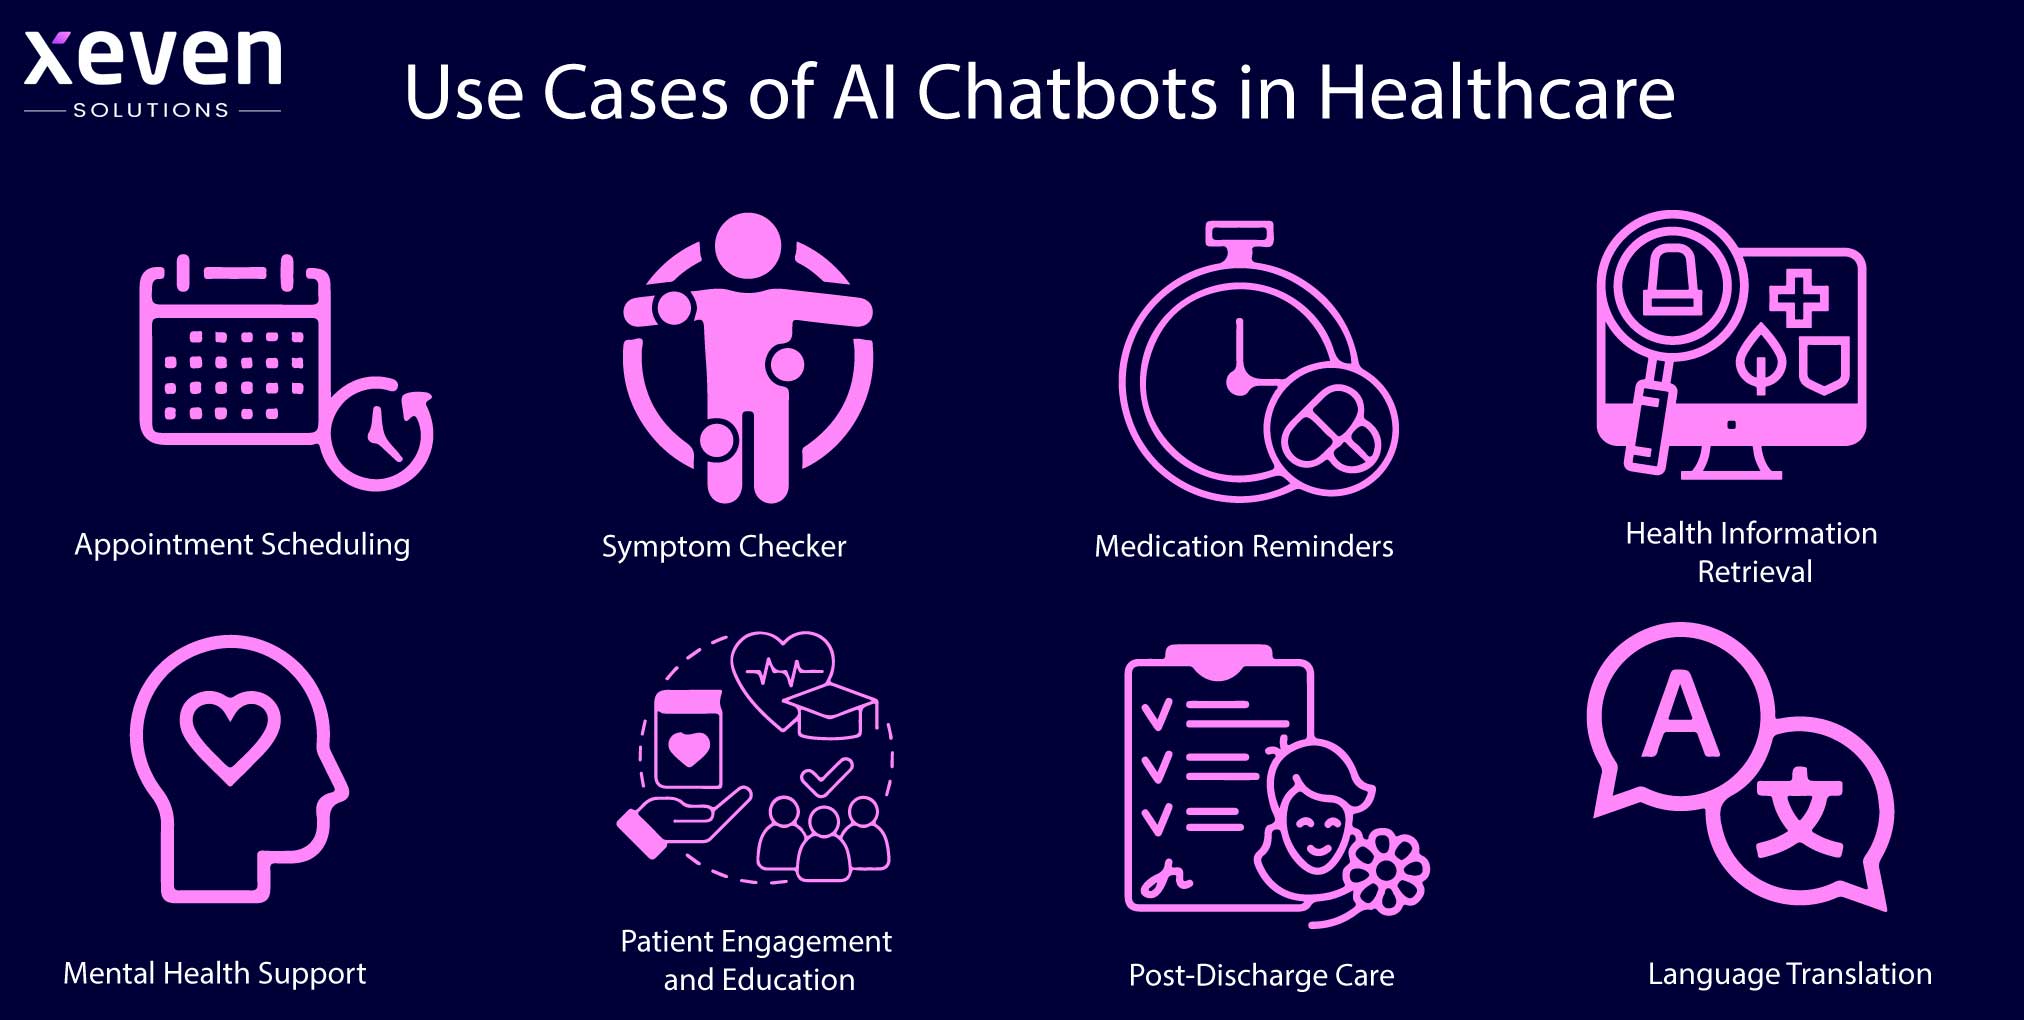 Use Cases of AI Chatbots in Healthcare